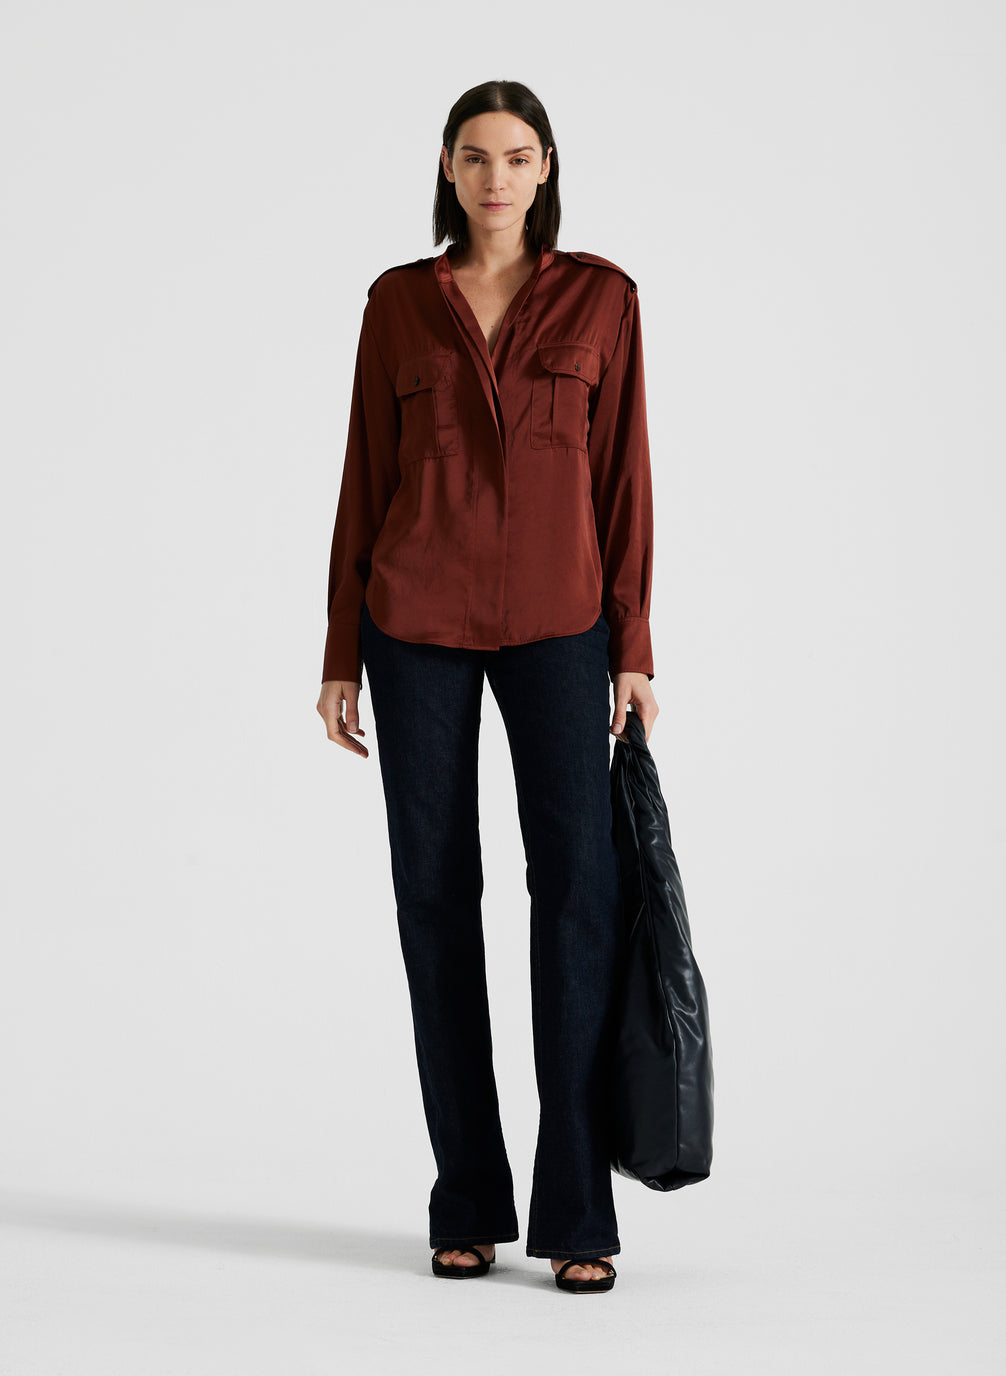 front view of woman wearing maroon satin long sleeve top and black pants